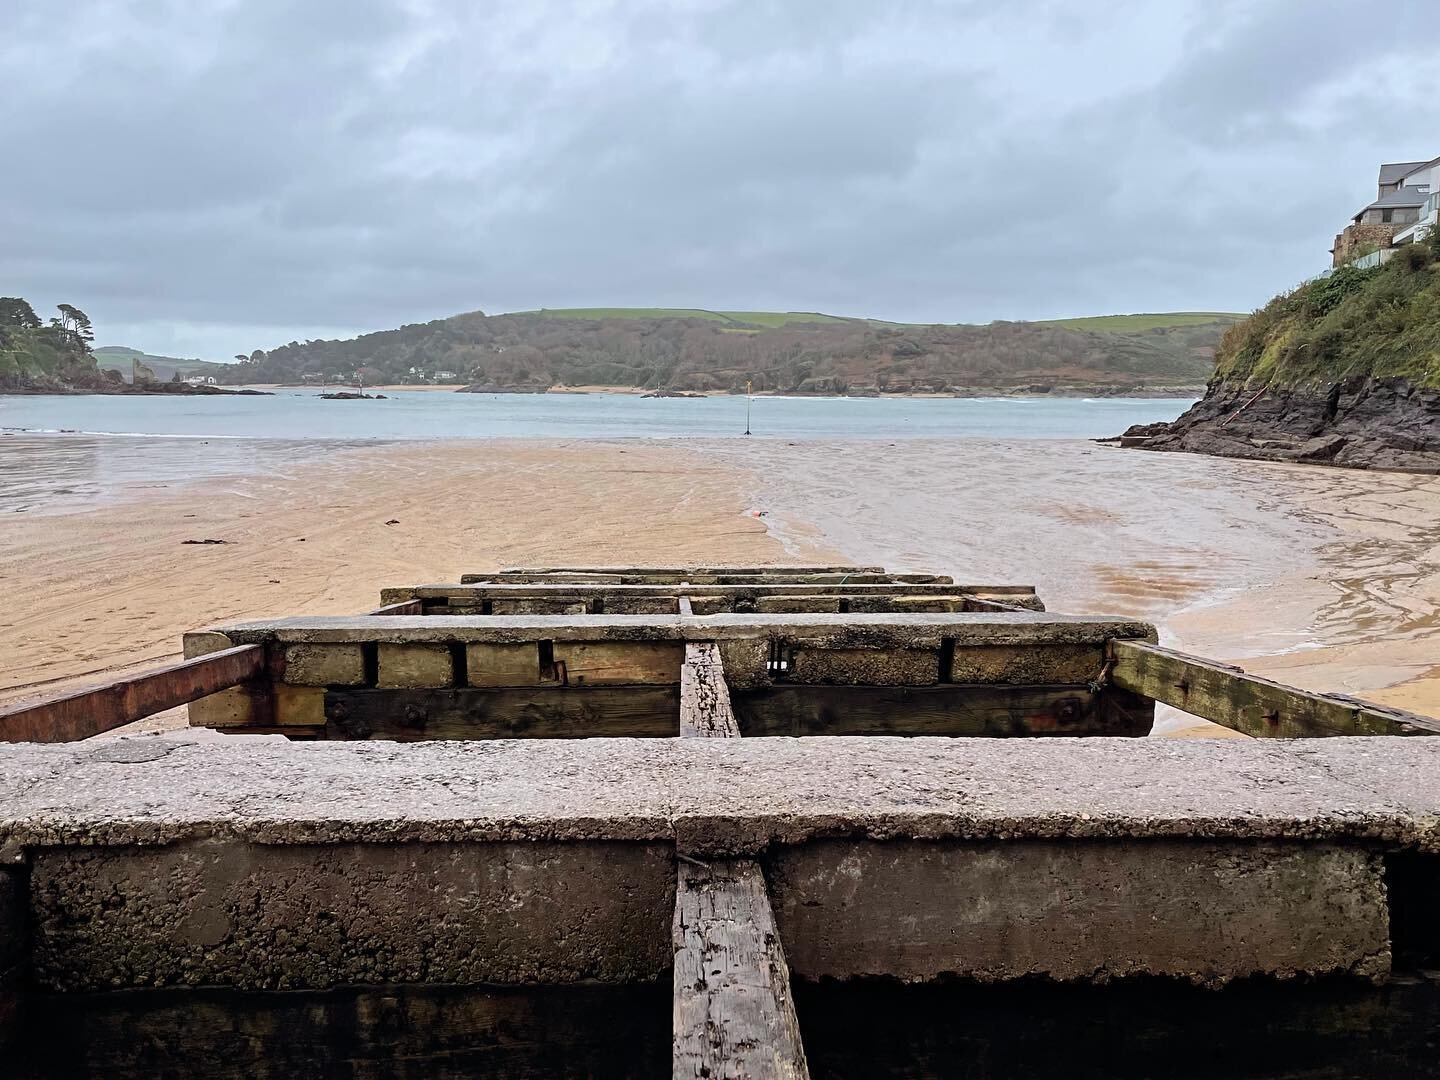 01.11.23 slipway up, winterisation of the Boathouse complete just in time before the storm hits our shores. A moment to thank all our customers new and old for your continued support. We have some exciting times ahead with the Boathouse and can&rsquo